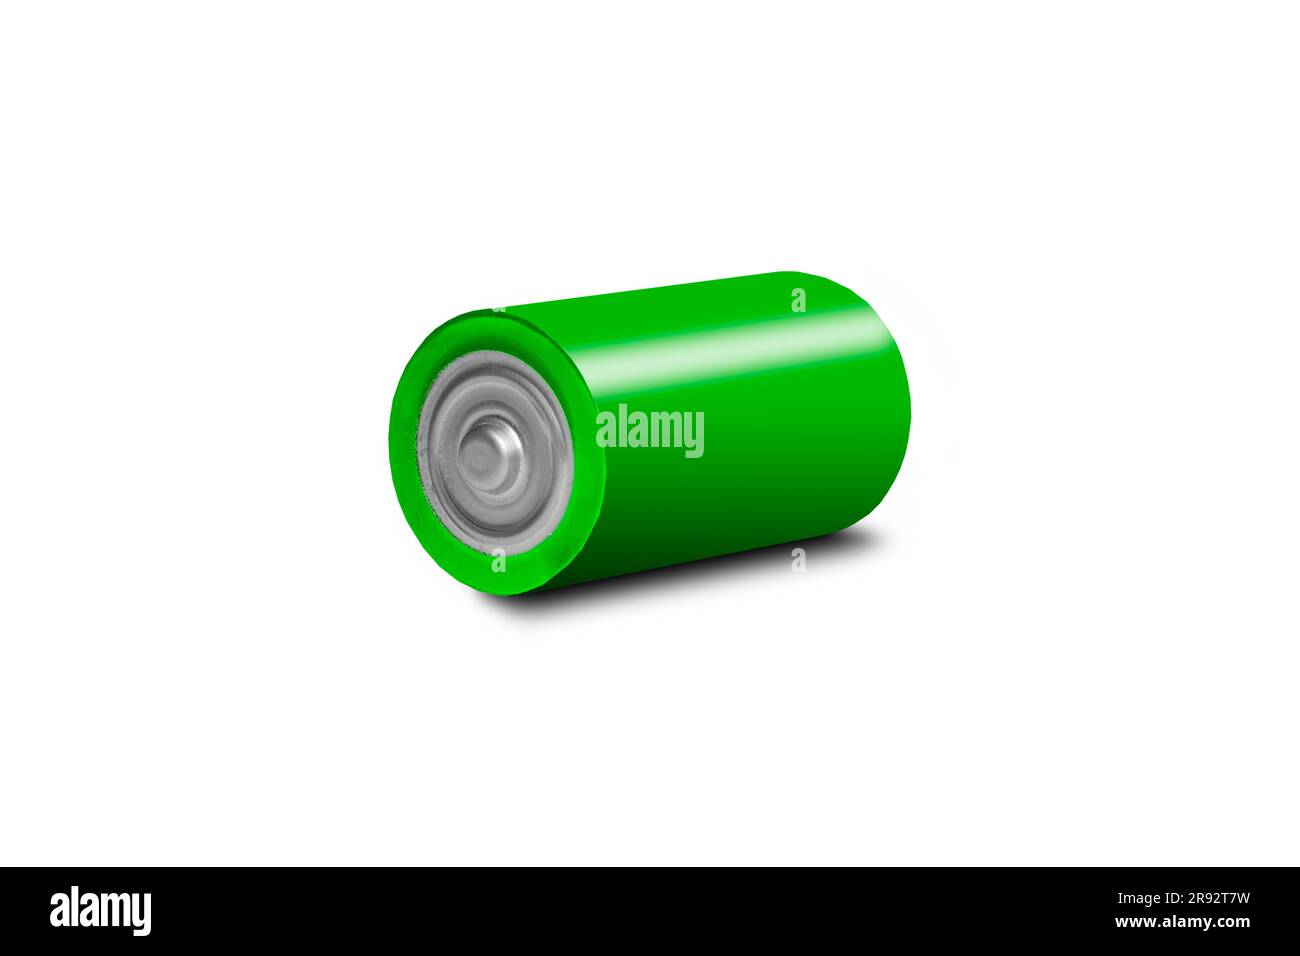 Battery, composite image Stock Photo